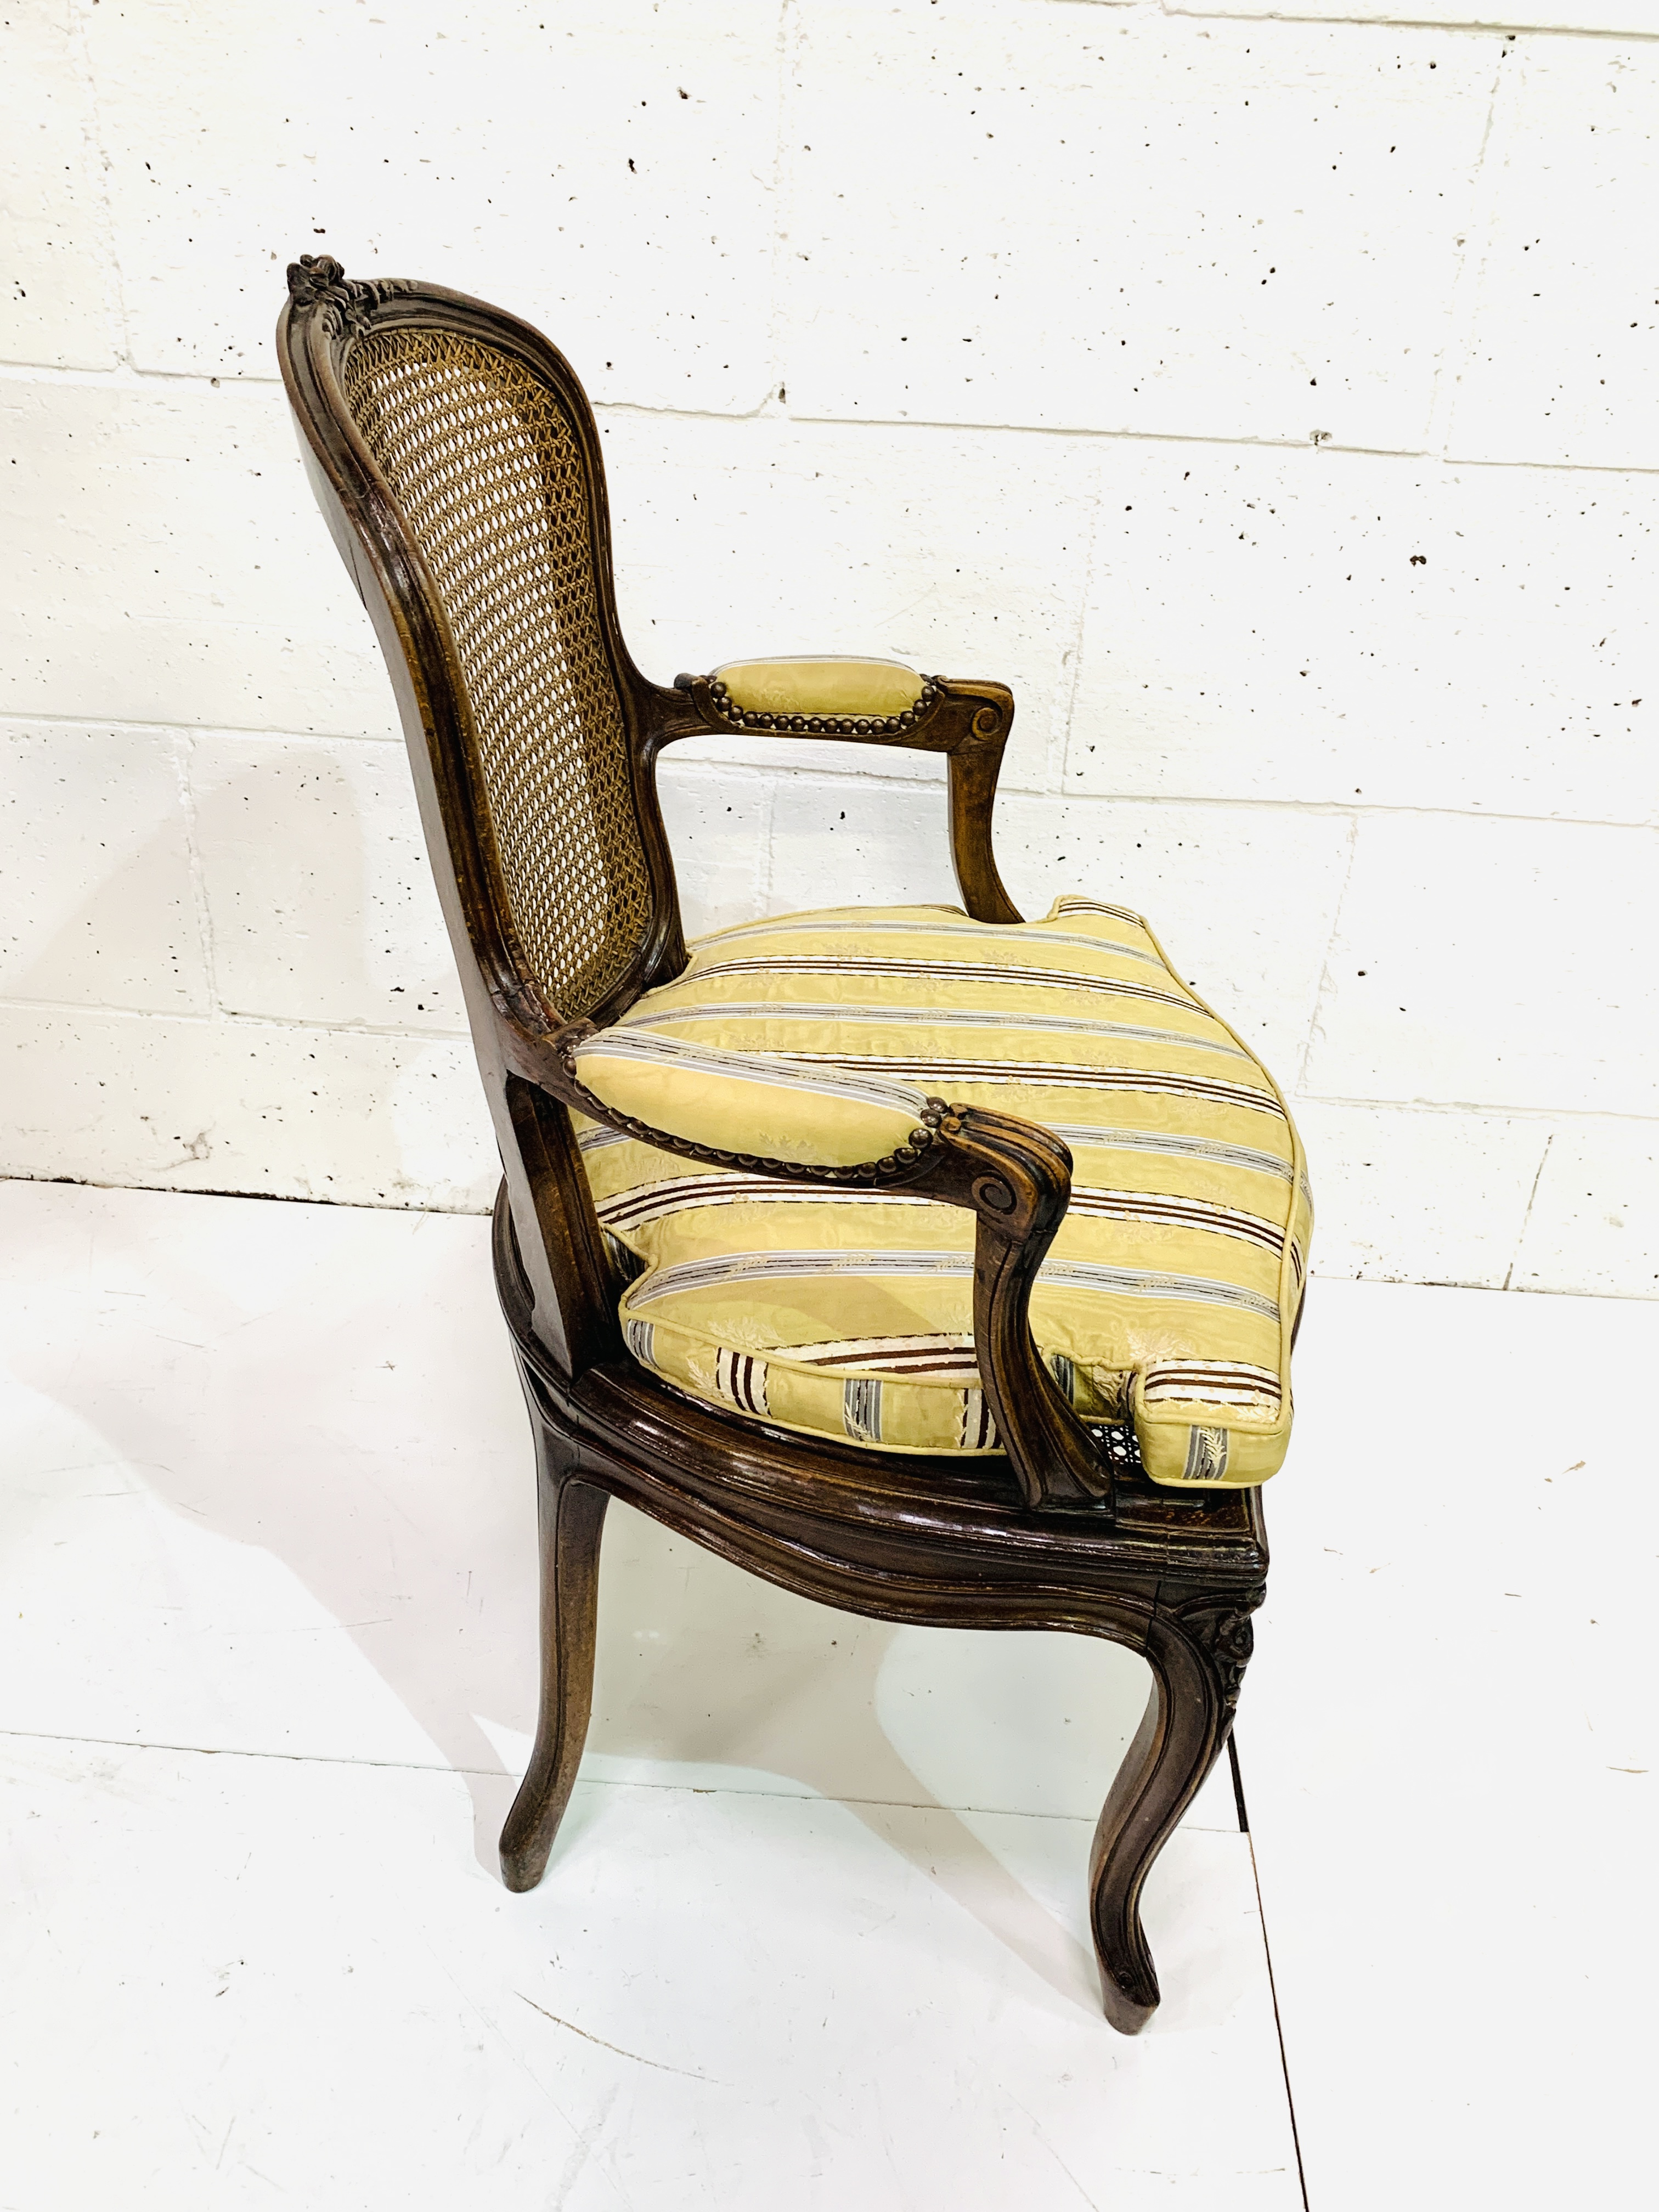 Pair of French style open arm chairs - Image 3 of 5